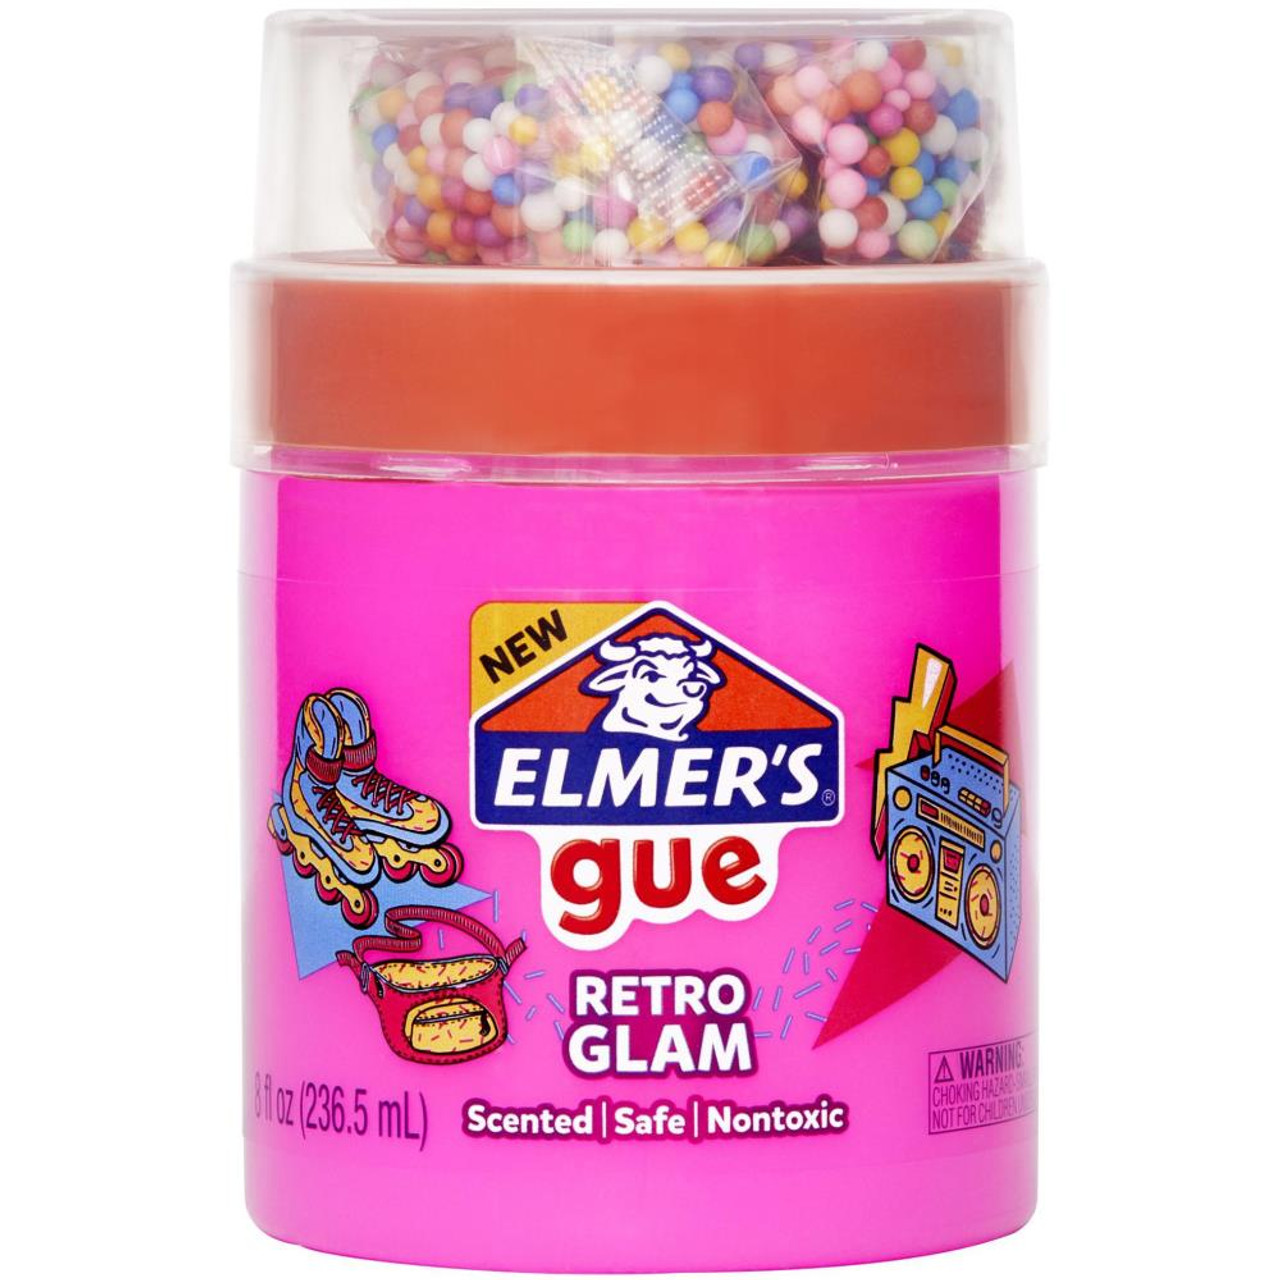 New Elmers Gue Elmer's Premade Slime 4oz-Bubblegum Non Toxic Pink Ready to  play